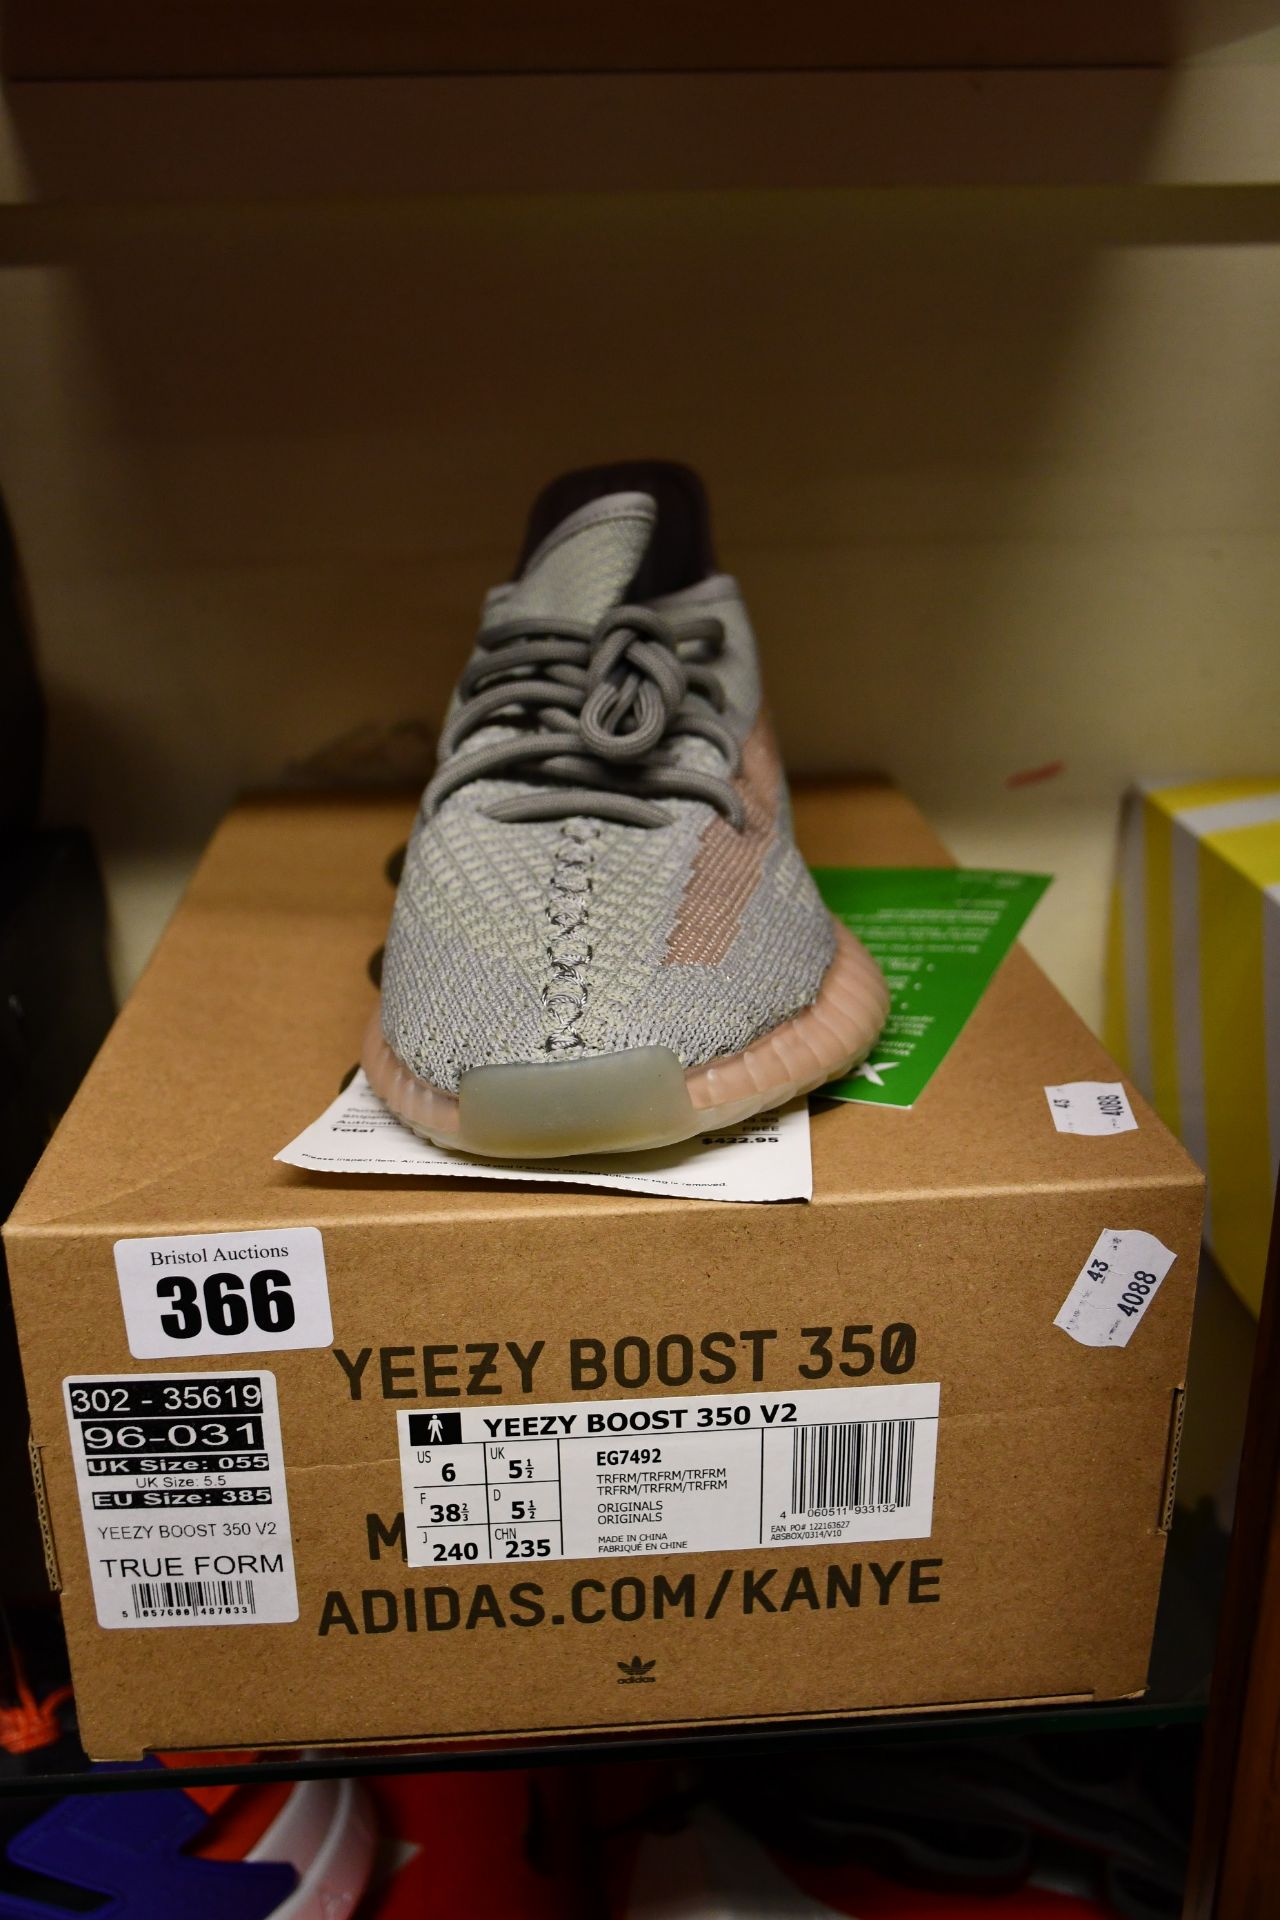 A pair of as new Adidas Yeezy Boost 350 V2 in grey (UK 5.5) from Stock X.